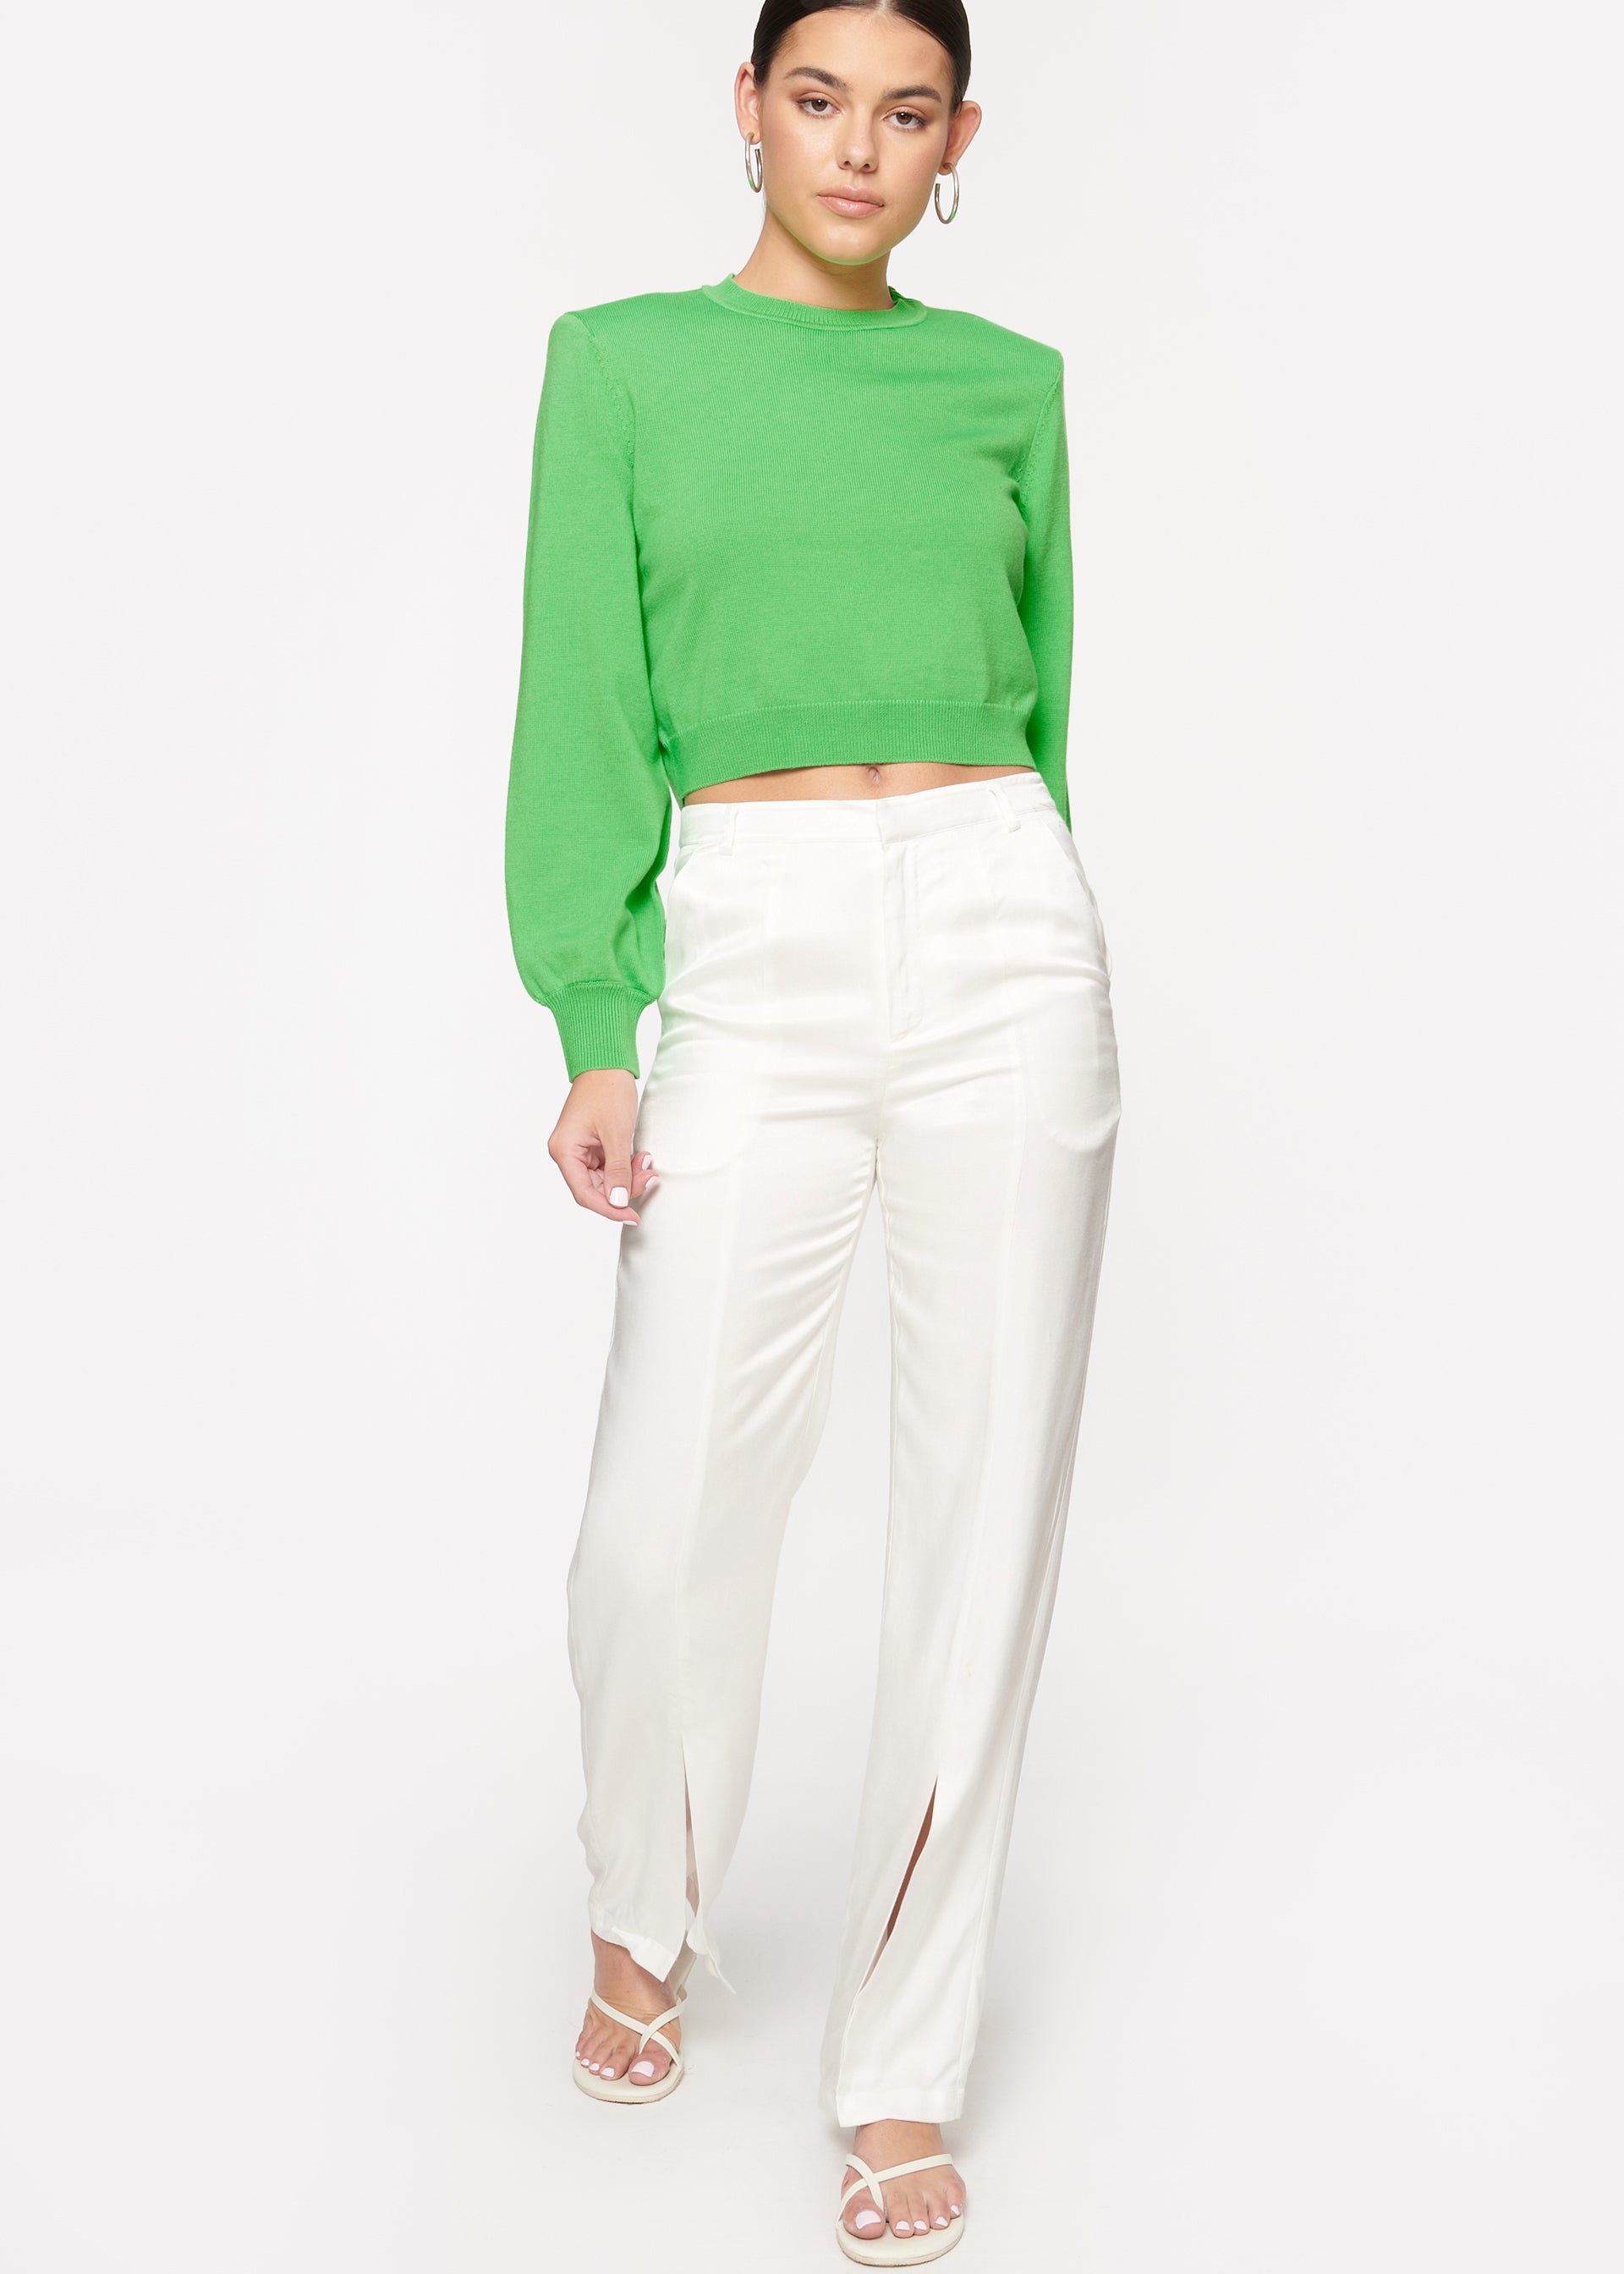 CAMI NYC Amelie Twill Pant White